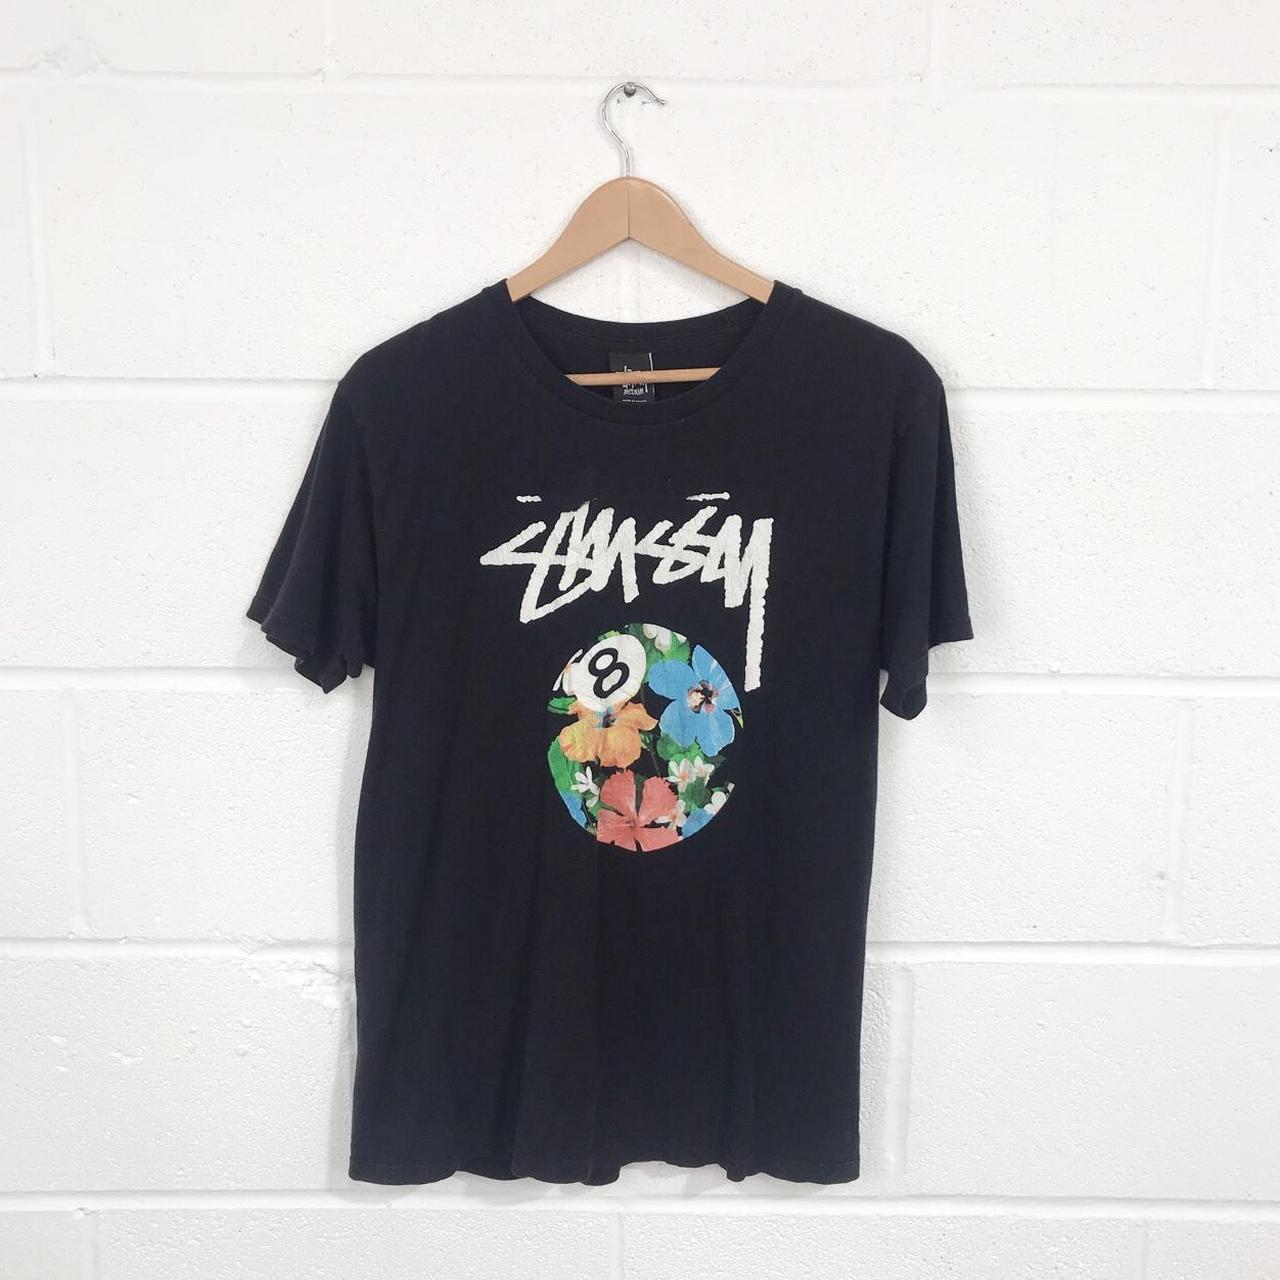 Product Image 1 - Stussy Graphic spellout T-shirt Tee

FREE